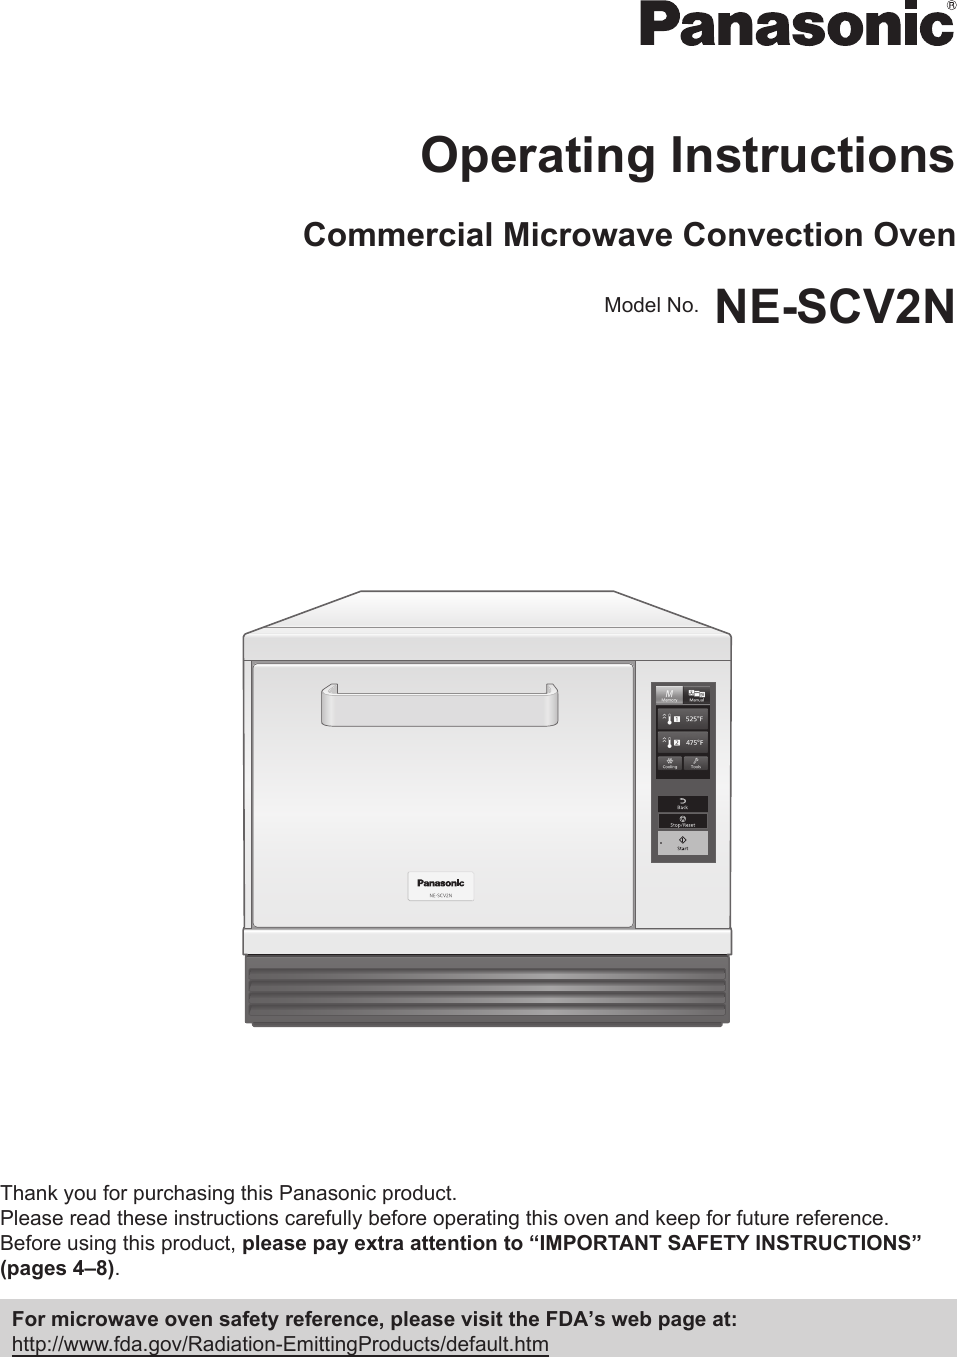 Operating InstructionsCommercial Microwave Convection Oven Model No. NE-SCV2NNE-SCV2NThank you for purchasing this Panasonic product.Please read these instructions carefully before operating this oven and keep for future reference.Before using this product, please pay extra attention to “IMPORTANT SAFETY INSTRUCTIONS” (pages 4–8).For microwave oven safety reference, please visit the FDAʼs web page at:http://www.fda.gov/Radiation-EmittingProducts/default.htm